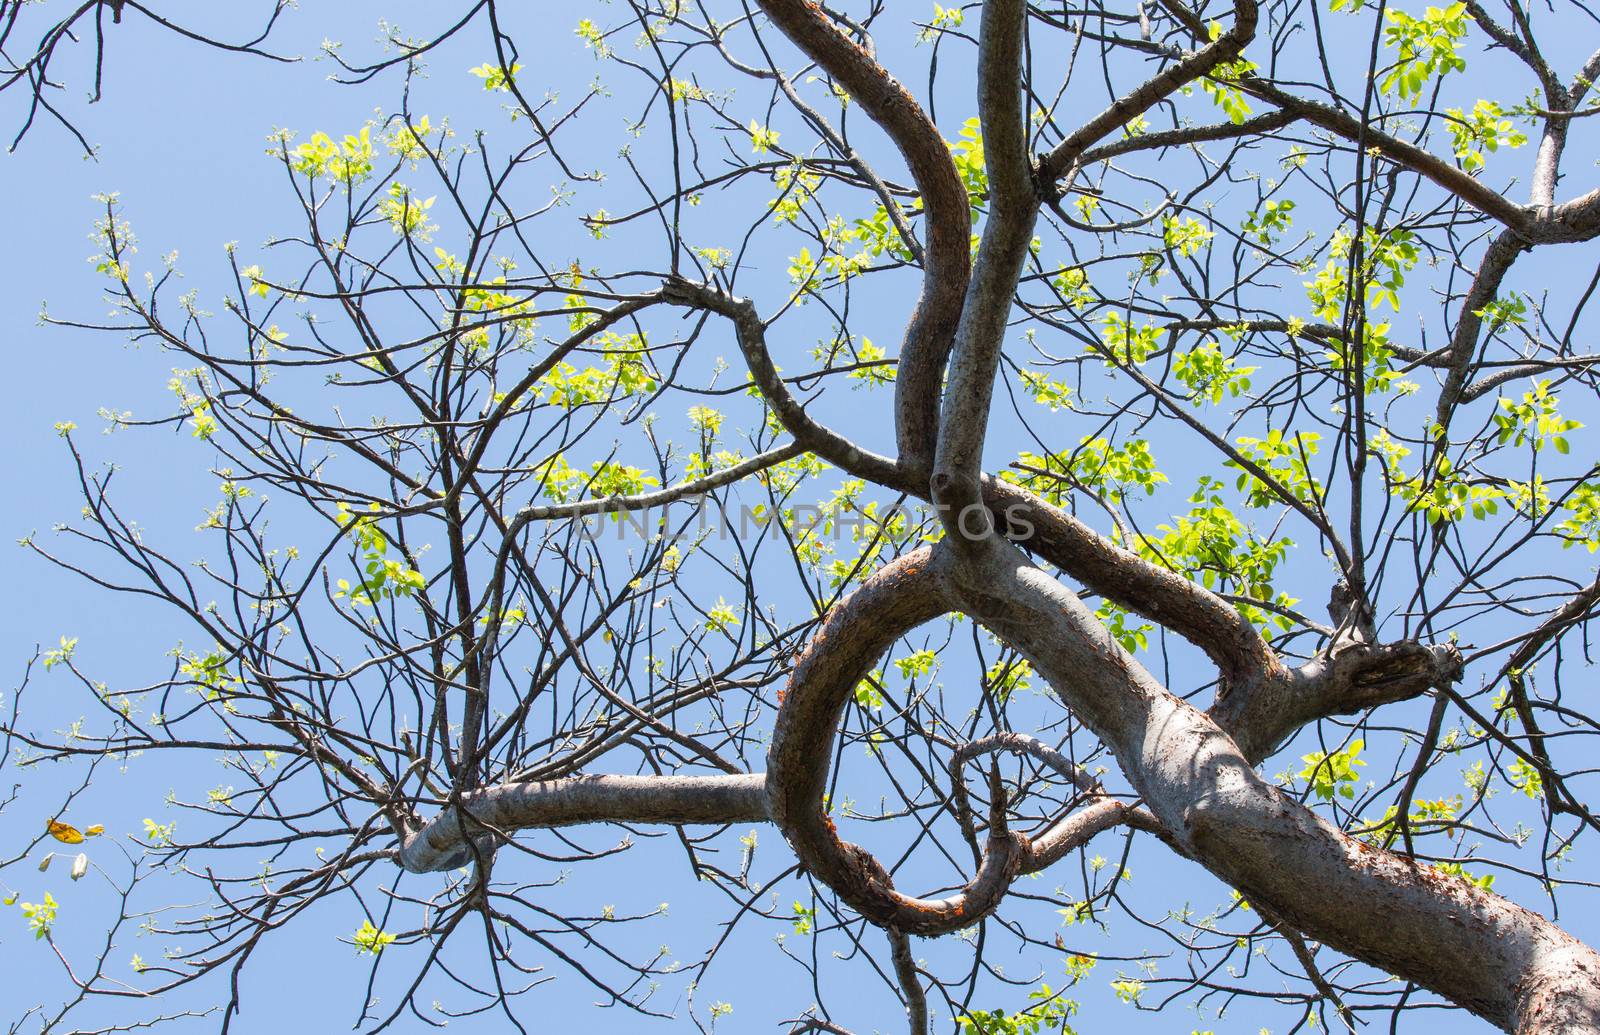 This image shows a Gumbo Limbo tree with bright green leaves during Spring in Key West